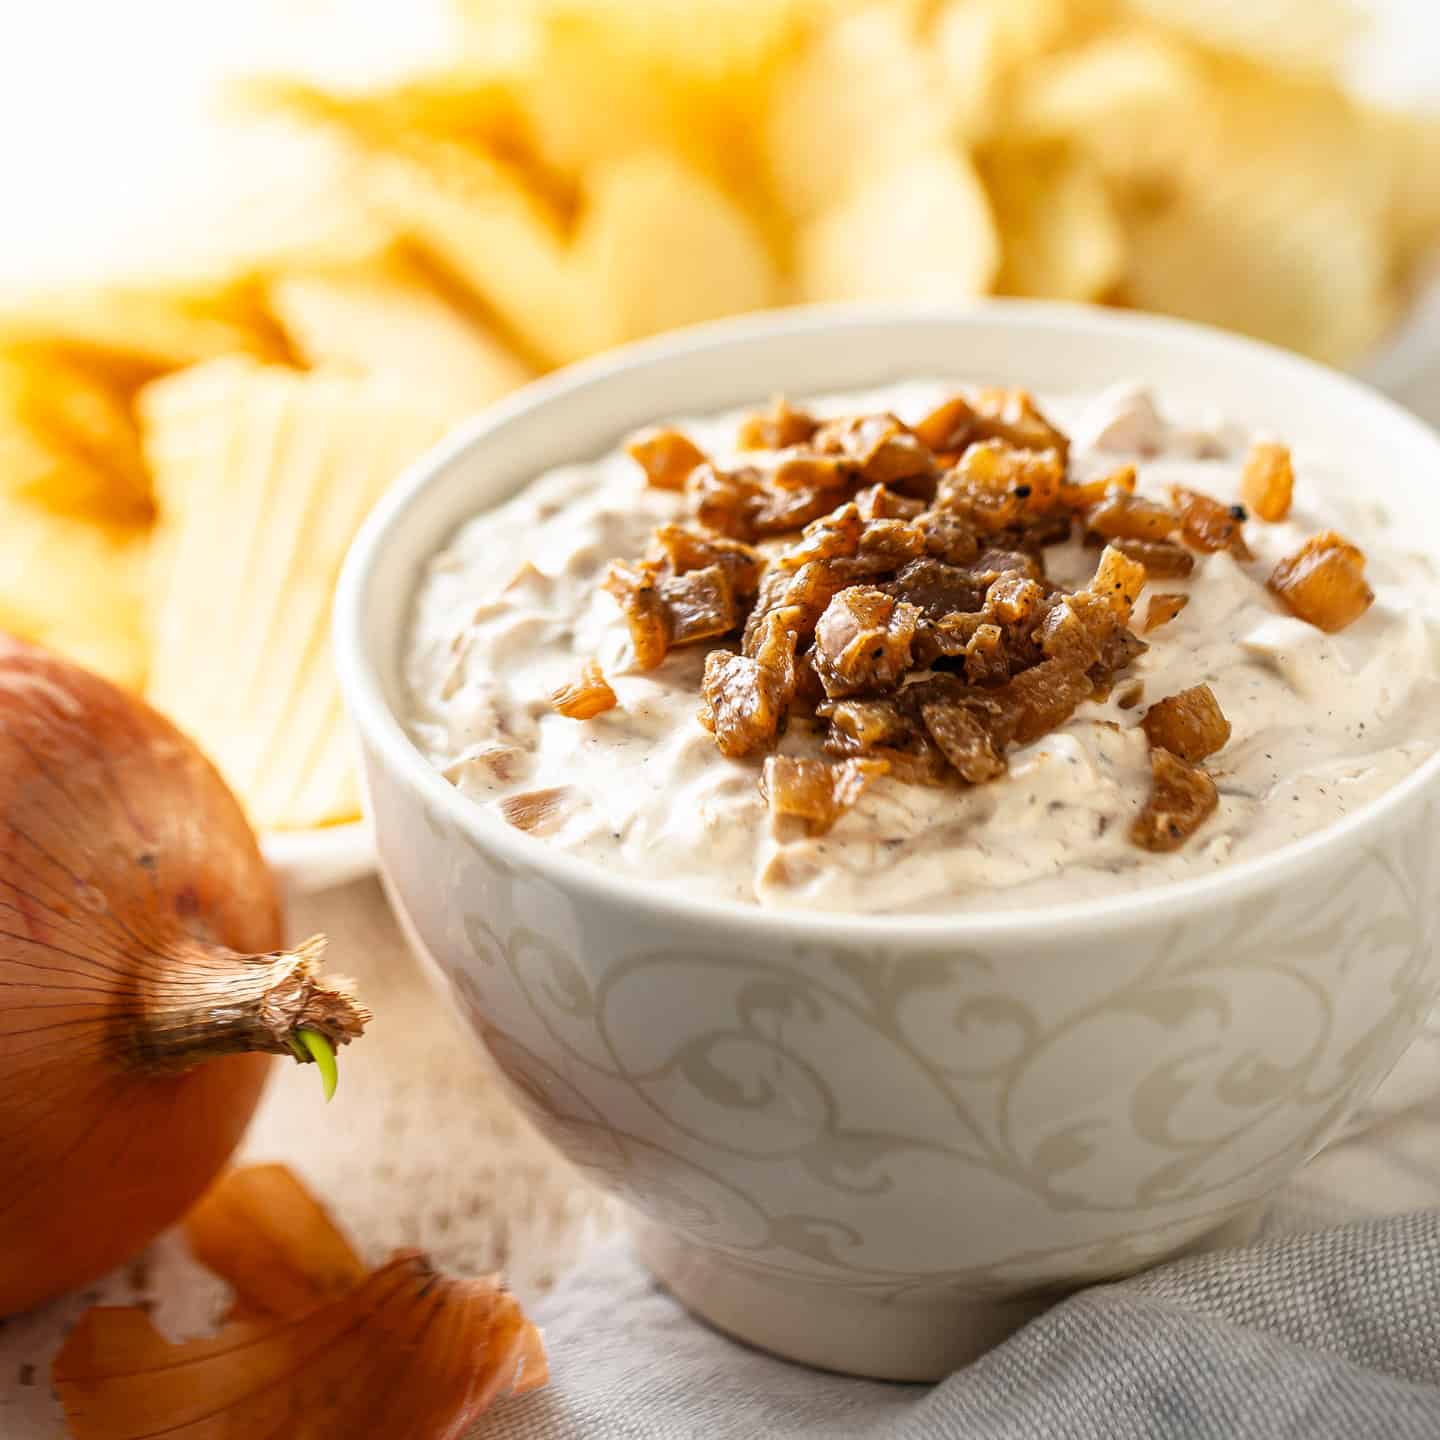 French onion dip presented in a bowl with potato chips in the background.